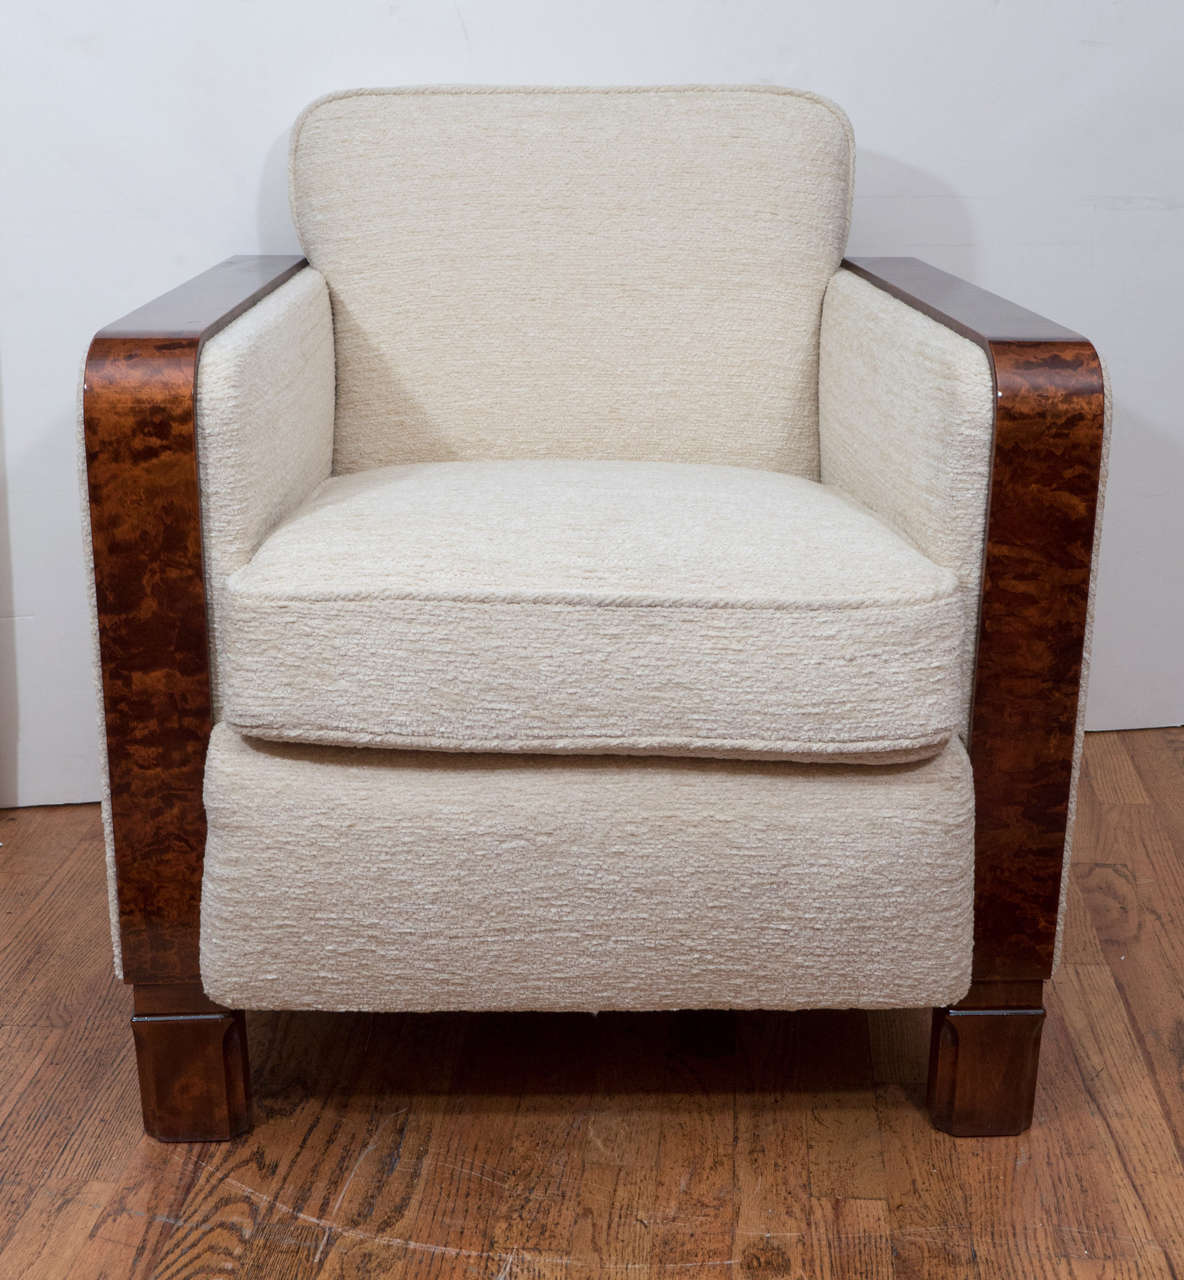 Solid, deep and extremely comfortable, these Art Deco club chairs illustrate the design influence of Cubism of the time. The plush, wool bouchle upholstery adds a creamy texture while the elegant, yet fiery, walnut stained arms and legs hug the